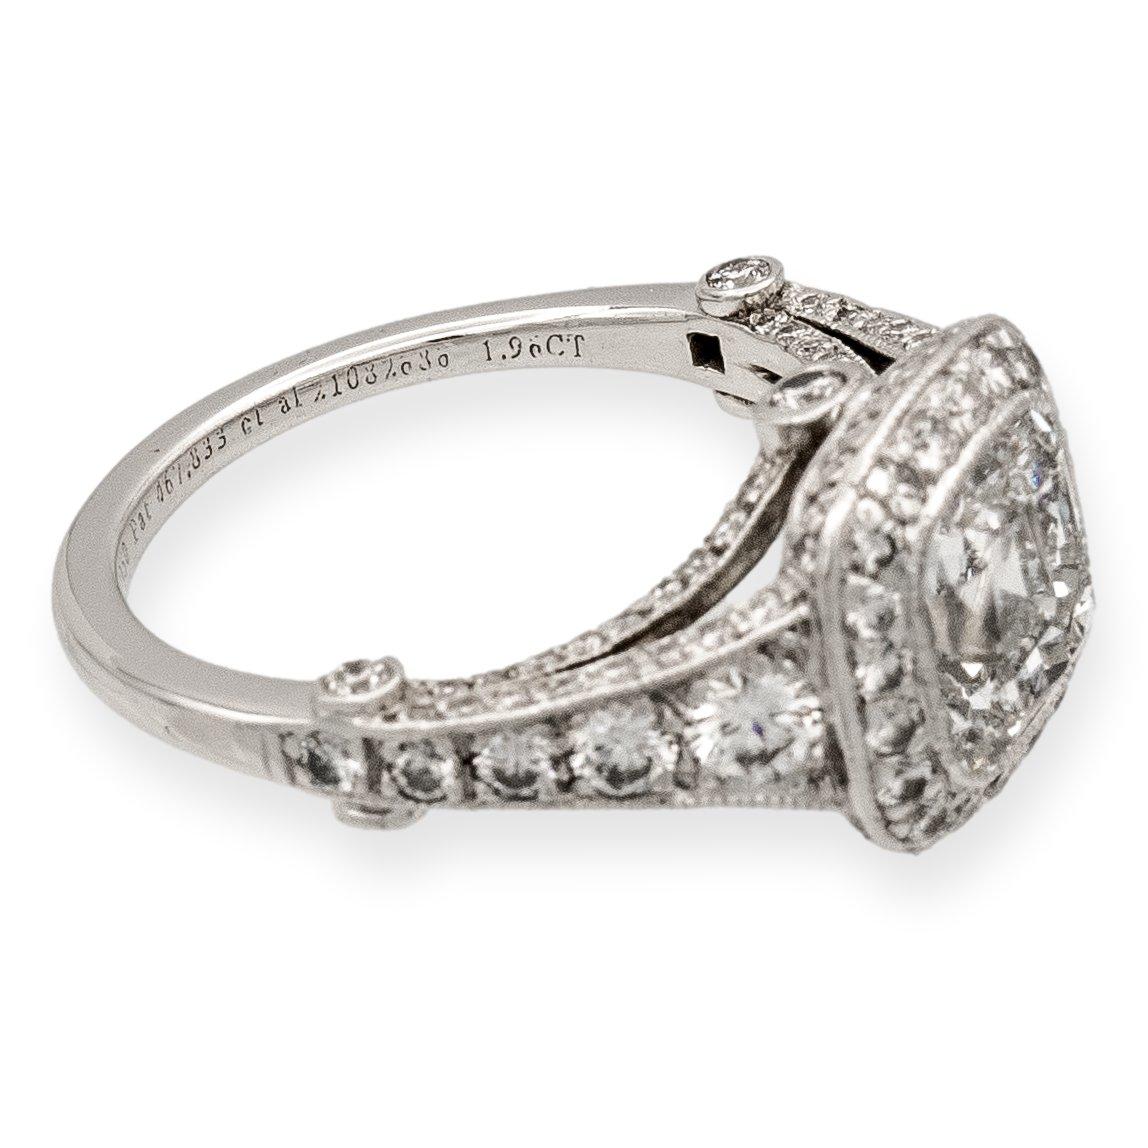 Tiffany & Co. diamond engagement ring from the Legacy collection finely crafted in platinum featuring a cushion brilliant cut center weighing 1.96 carats surrounded by 124 round brilliant cut diamonds weighing a total of 0.74 carats G-H color, fine